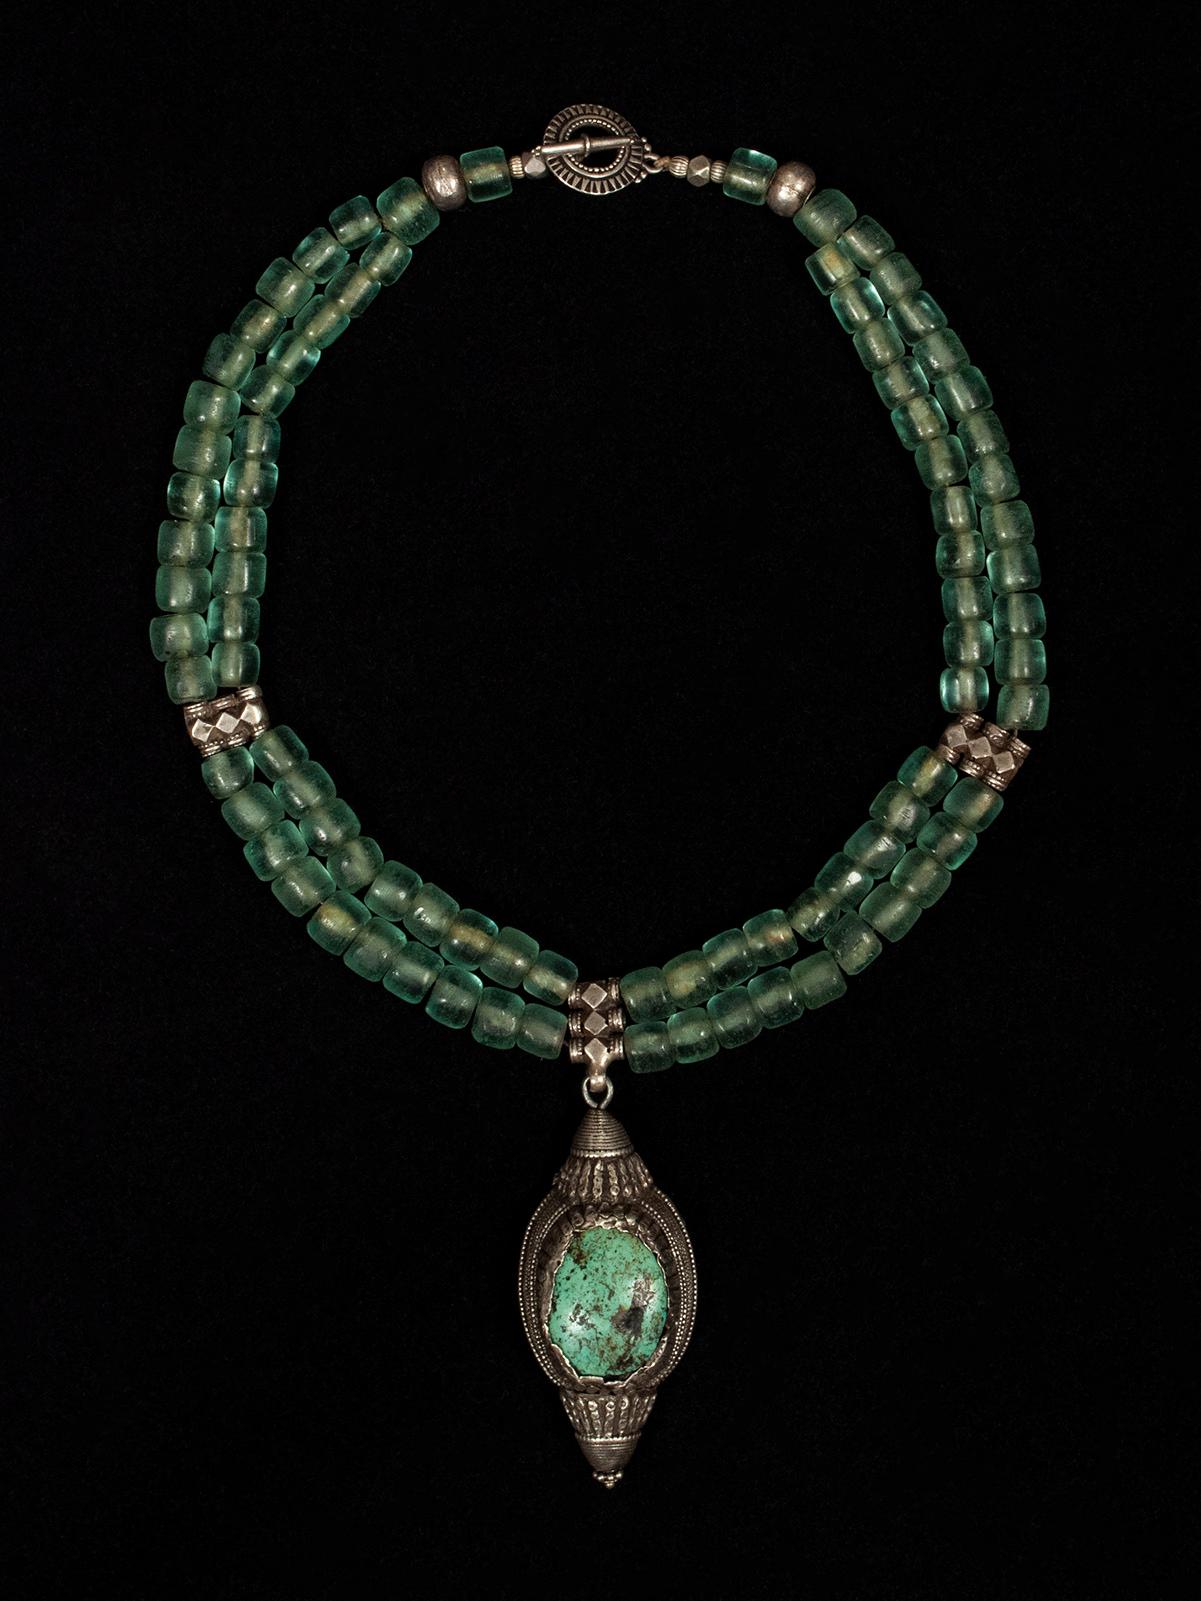 Antique Tibetan turquoise and silver bead pendant contemporary necklace

An antique Tibetan turquoise and silver hair ornament anchors a necklace of gorgeous antique green glass beads. A modern silver clasp finishes the piece, which has an interior